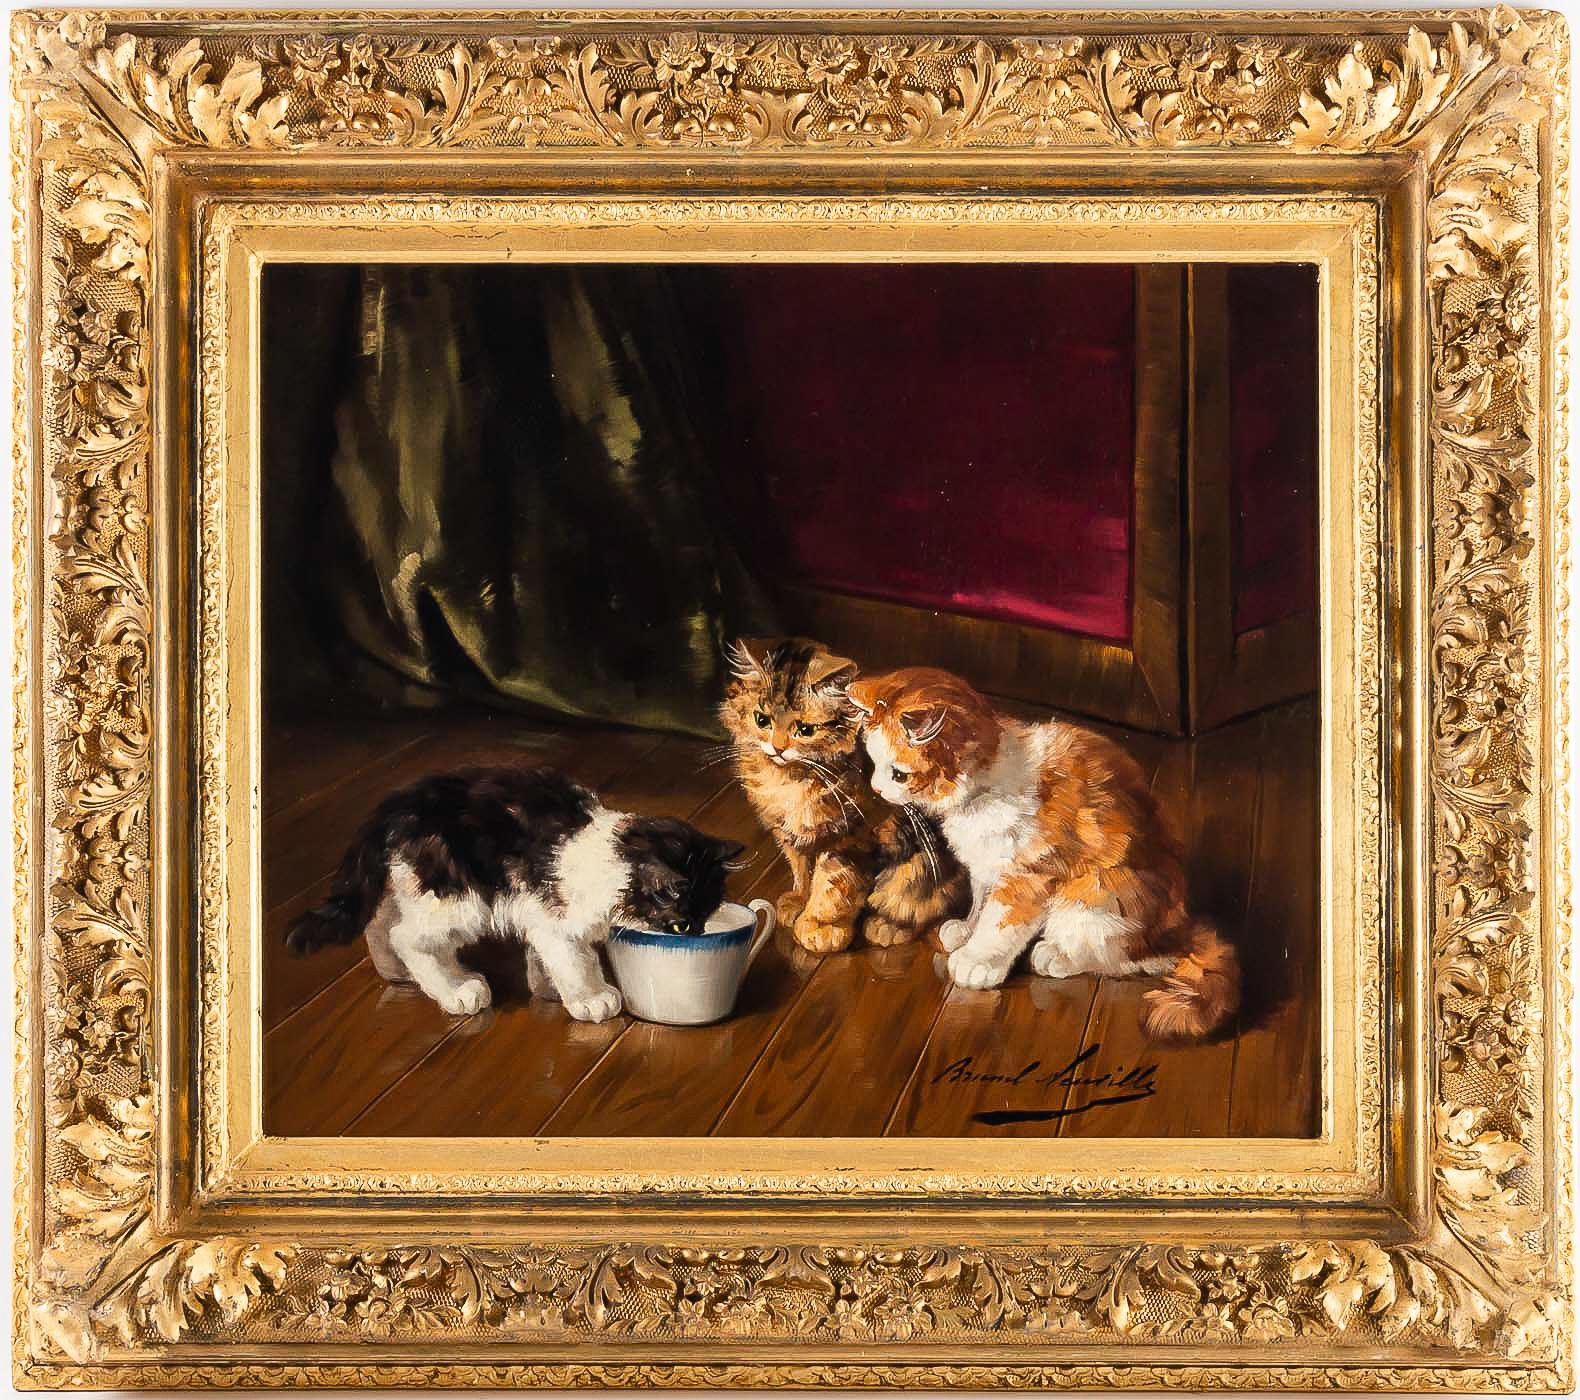 Alfred Arthur Brunel de Neuville, oil on canvas, The Three Cats, circa 1880-1900

Exciting and decorative oil on canvas, depicting three c cats drinking.
Our lovely painting is signed in a lower right by Alfred Arthur Brunel de Neuville circa